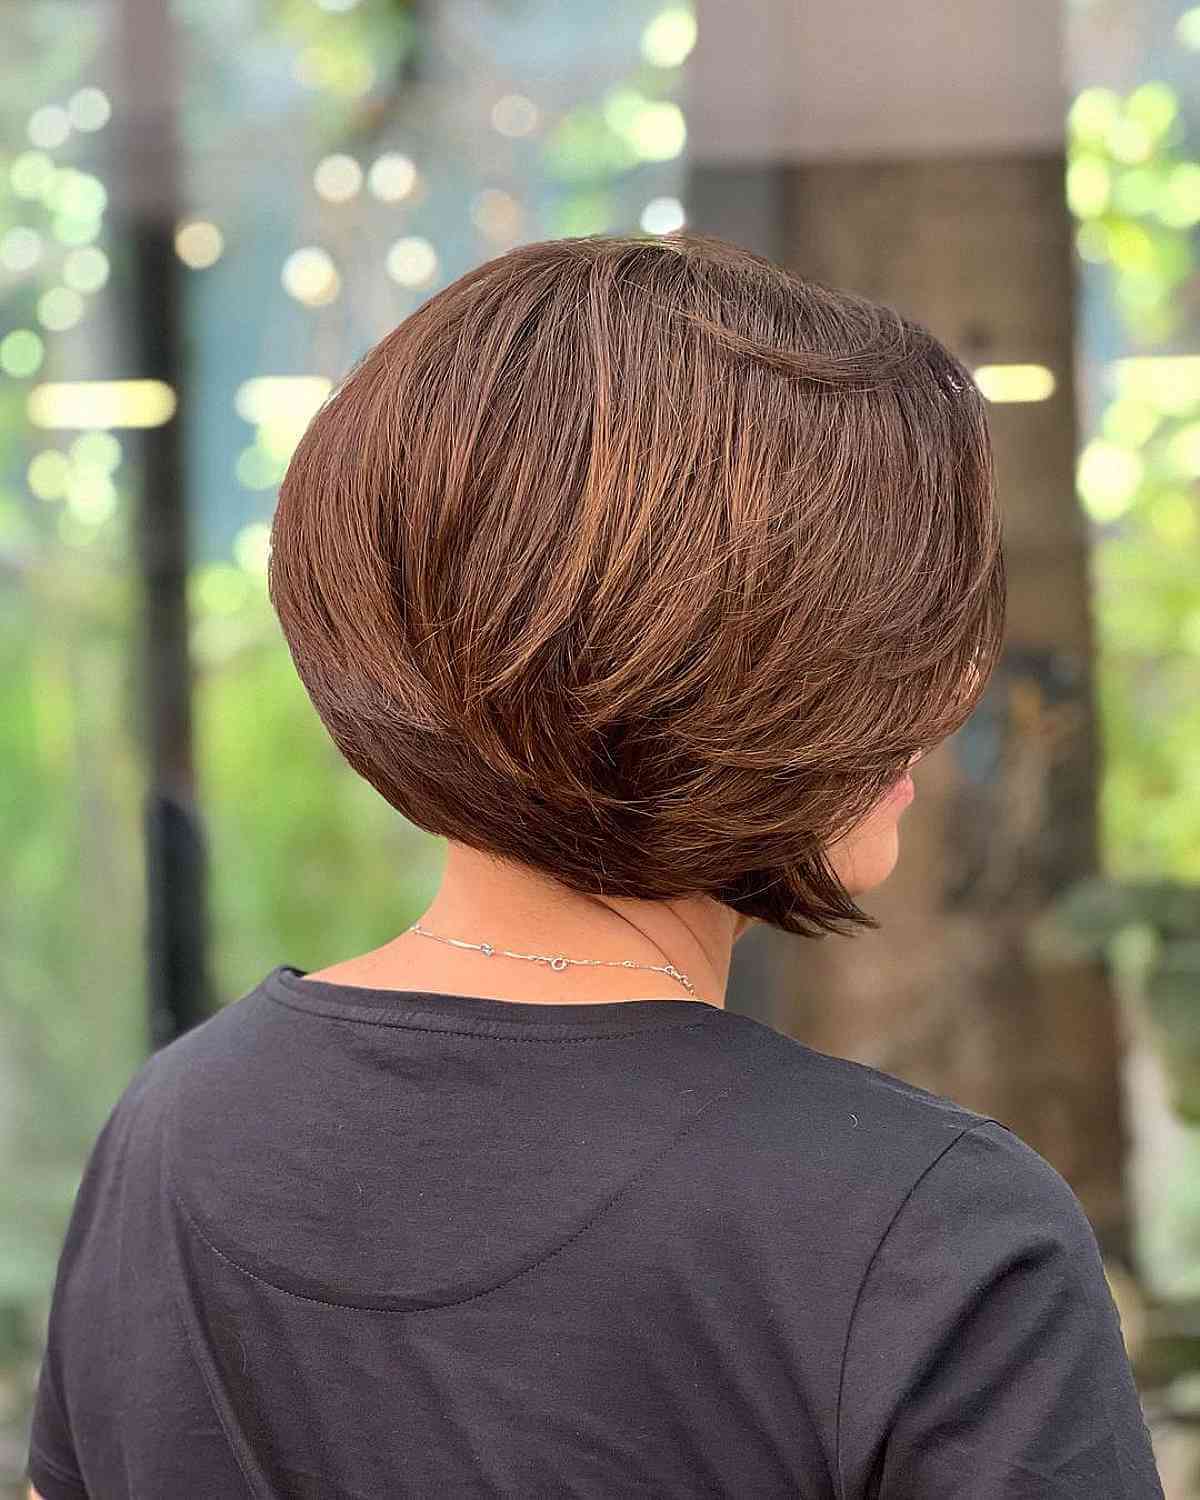 Short a-line bob hairstyle with layers